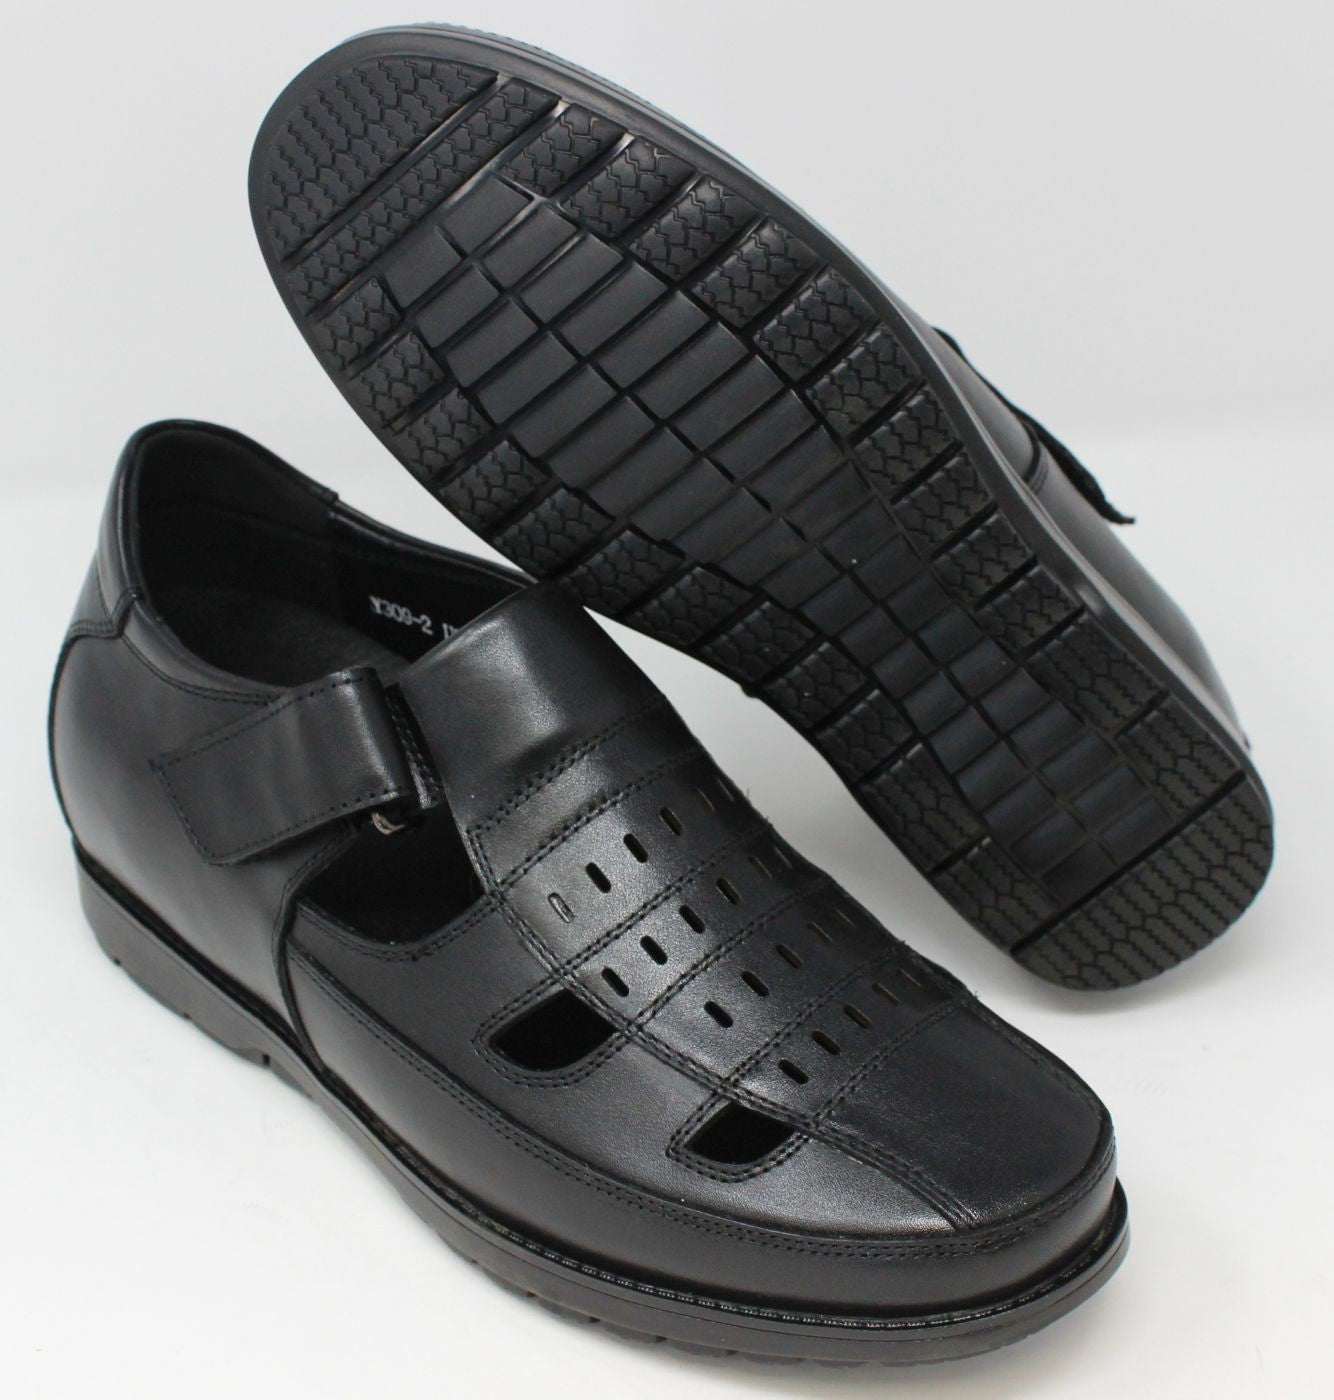 Elevator shoes height increase FSD0052 - 2.8 Inches Taller (BLACK) - Size 7.5 Only